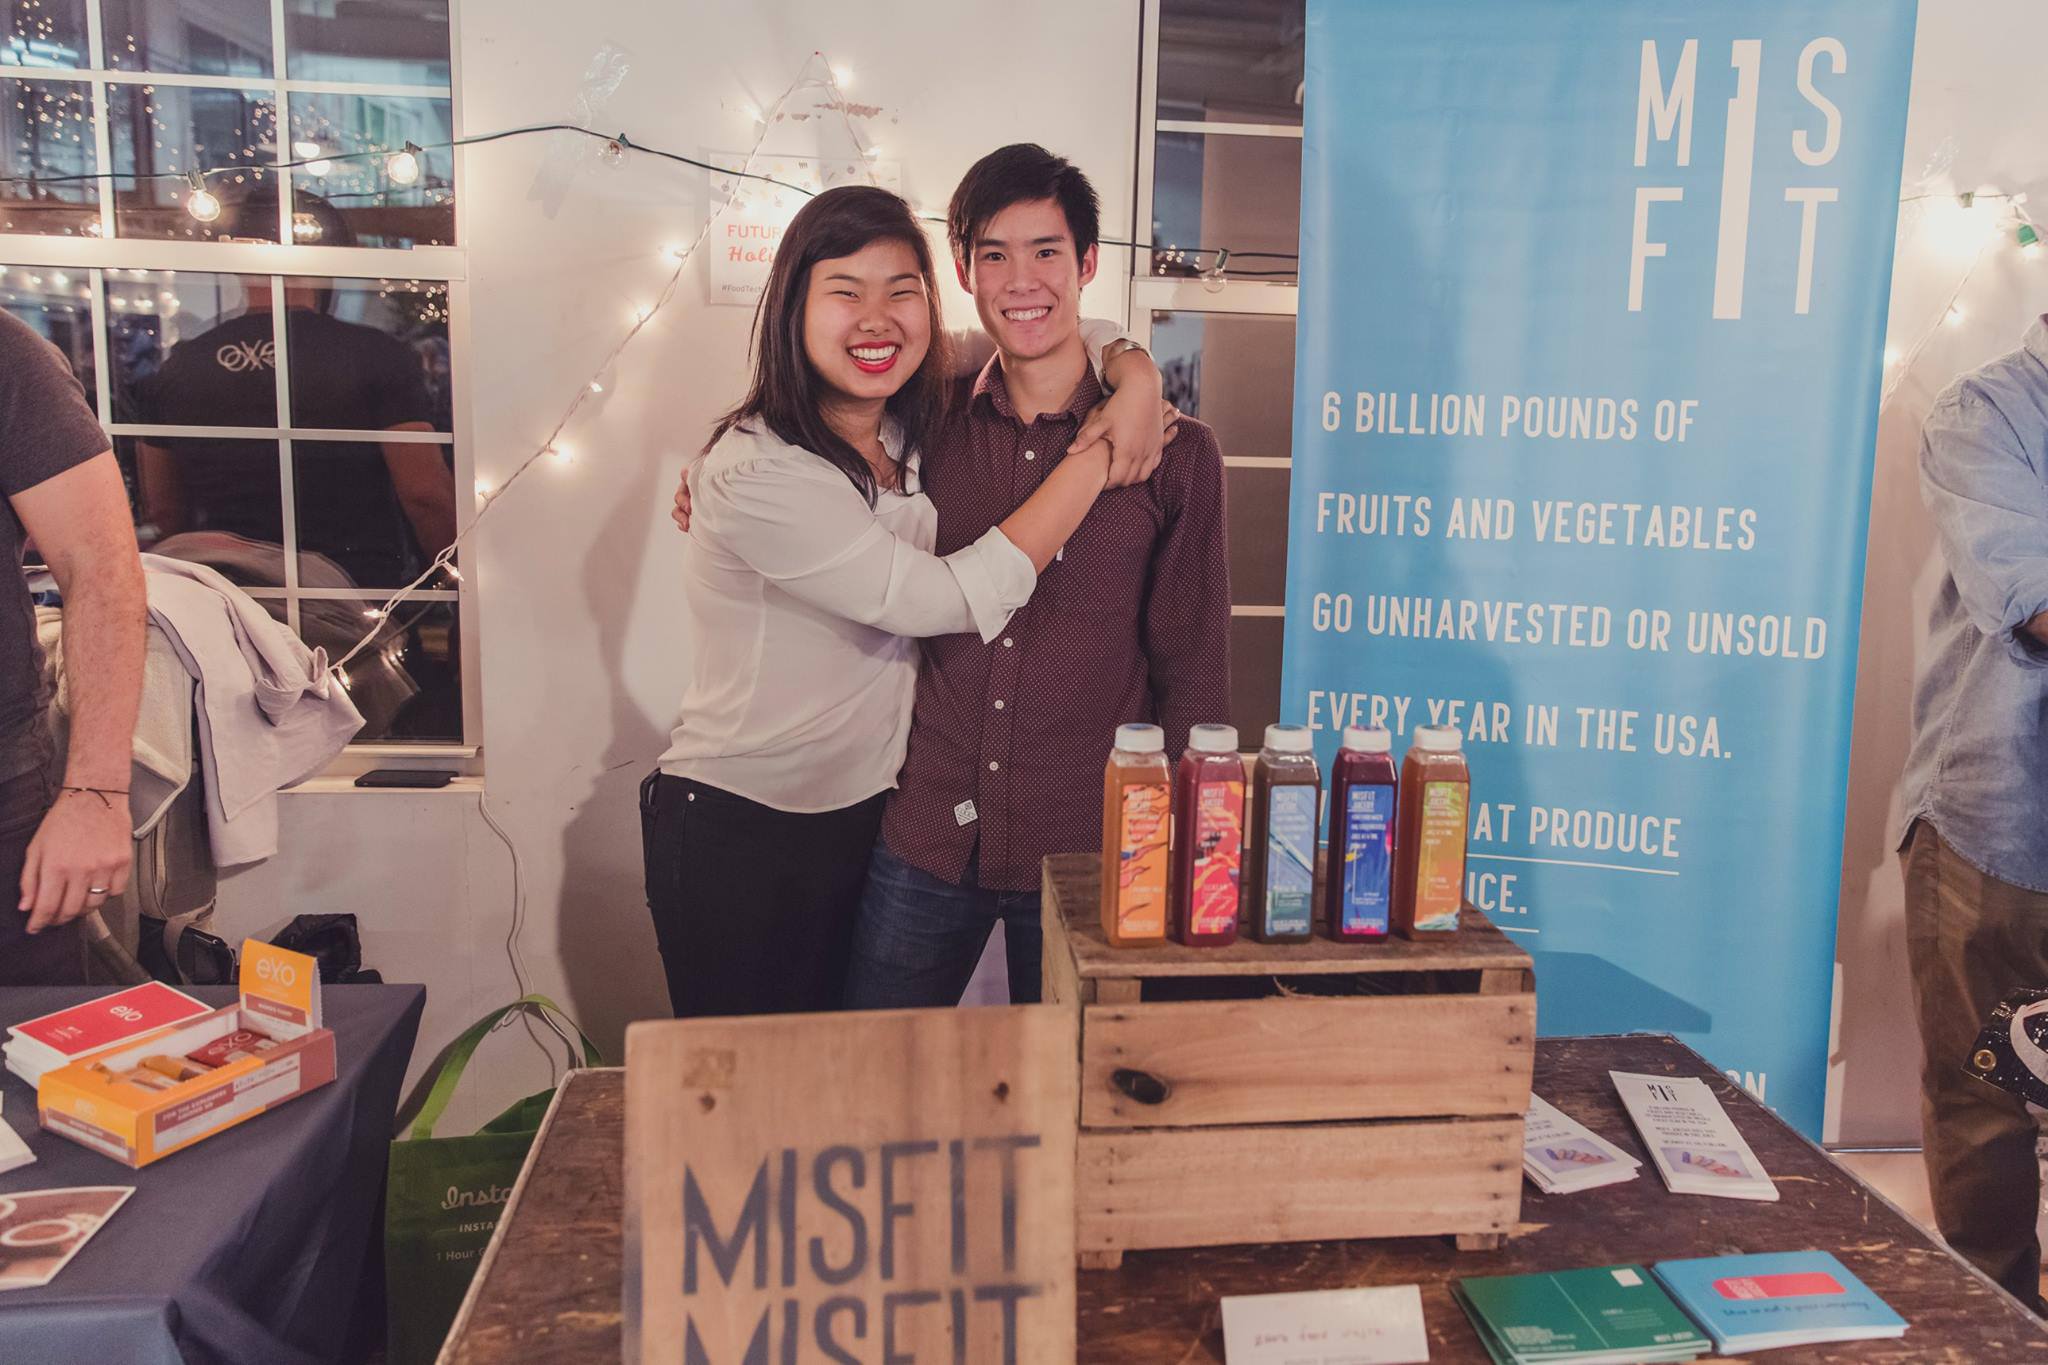 PHOTO: ABC News' Robin Roberts interviewed the creators of Misfit Juicery as part of her "Taking Care of Business" series, which highlights companies that give back to their communities. 